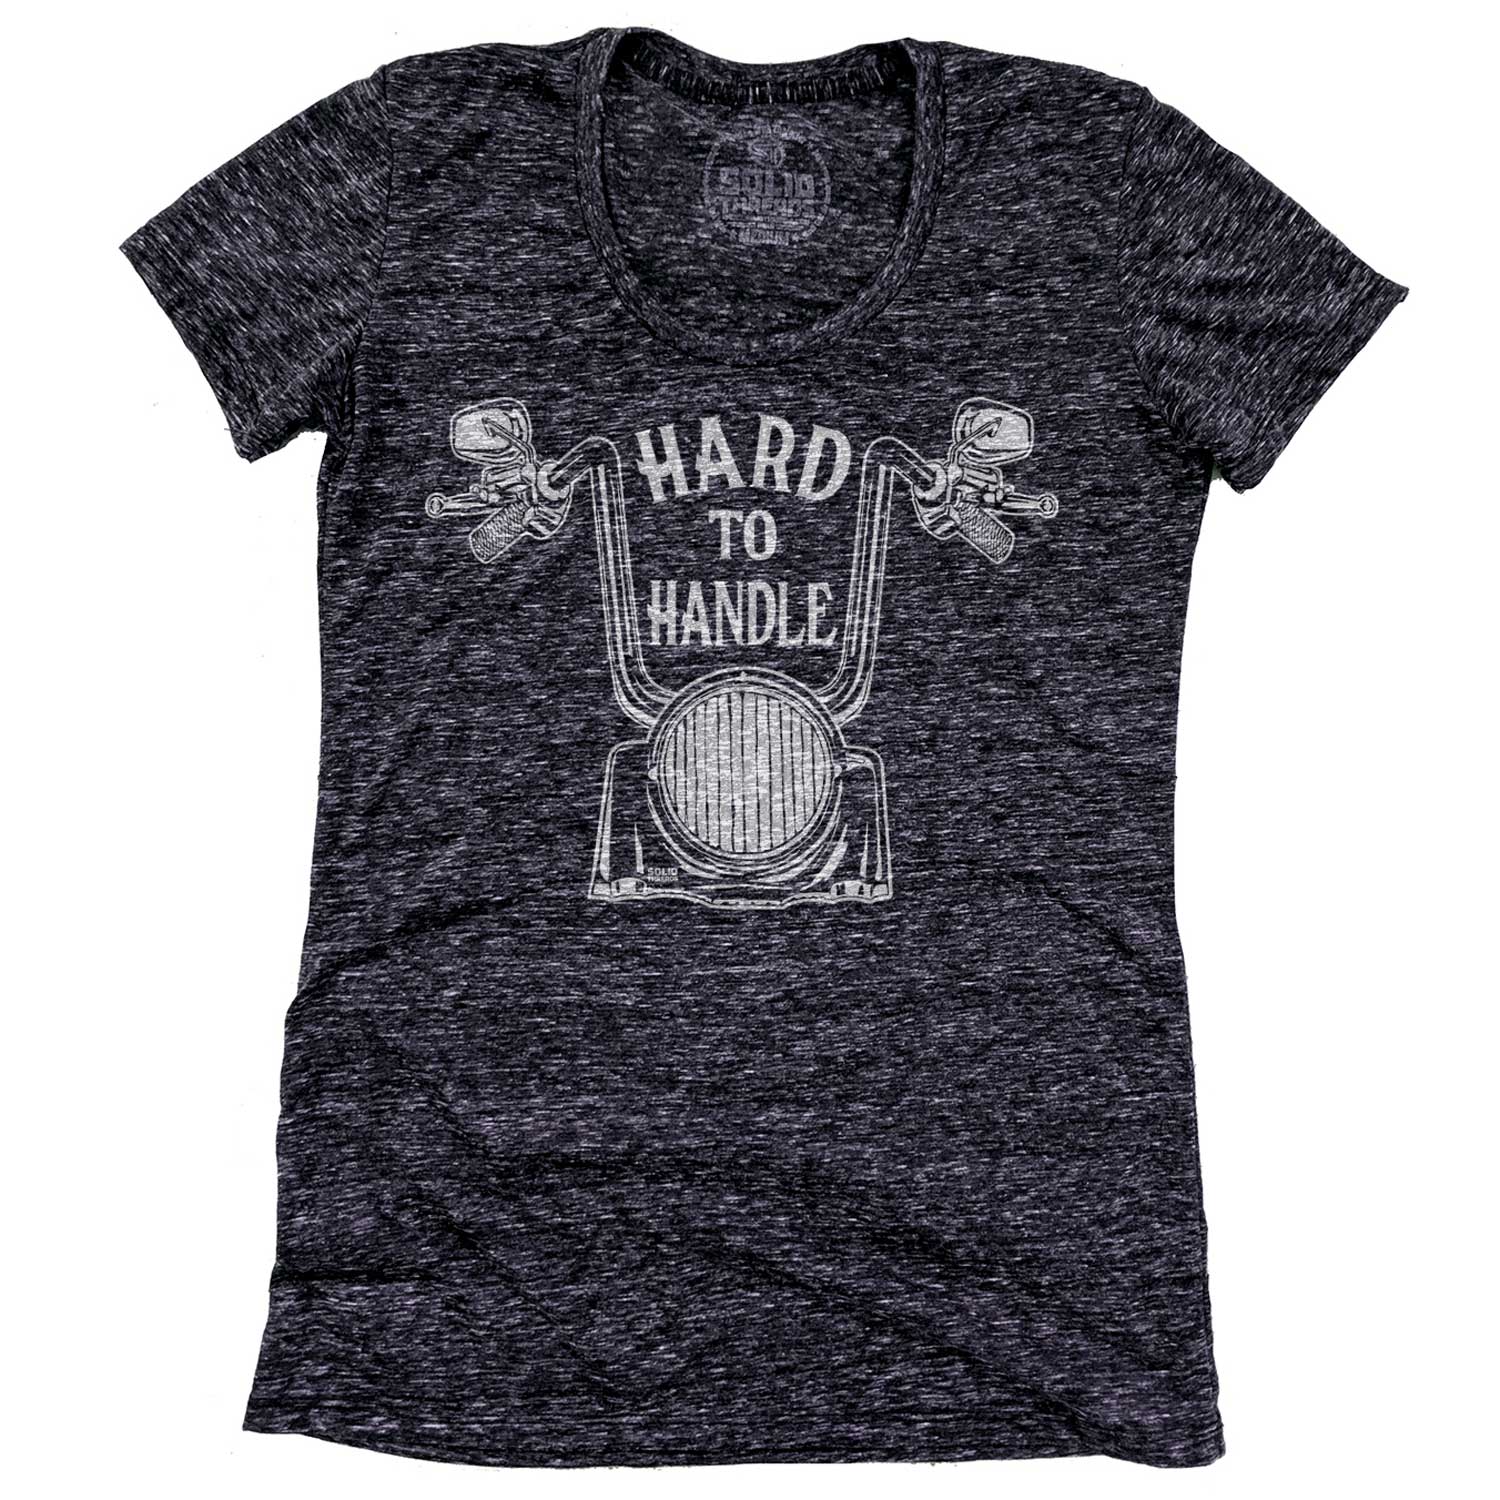 Women's Hard To Handle Cool Motorcycle Graphic T-Shirt | Vintage Bike Triblend Tee | Solid Threads